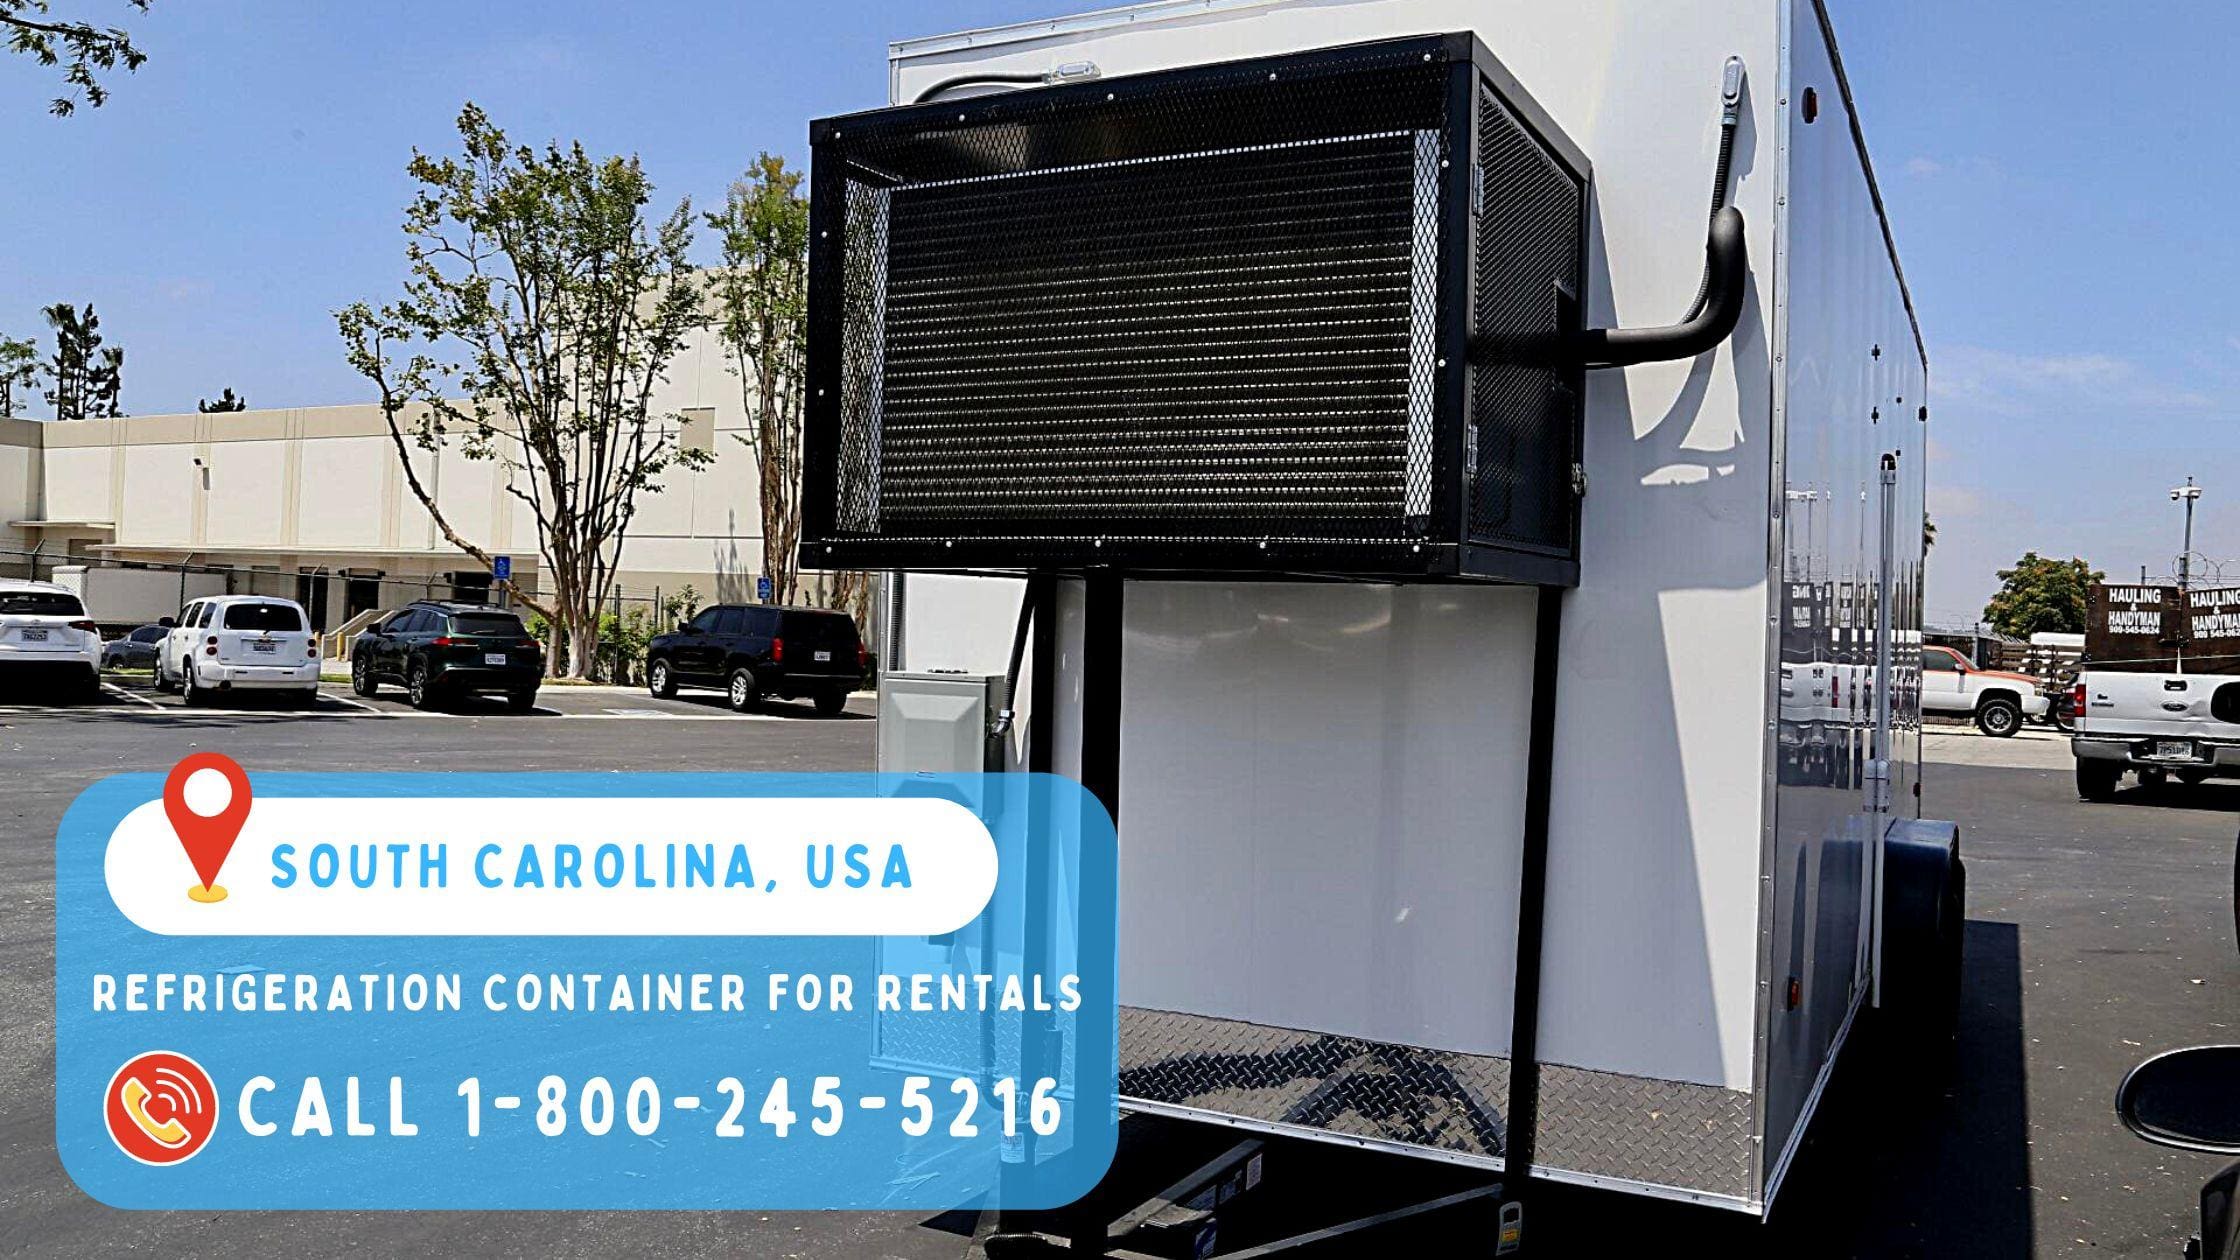 Refrigeration Container for rentals in South Carolina